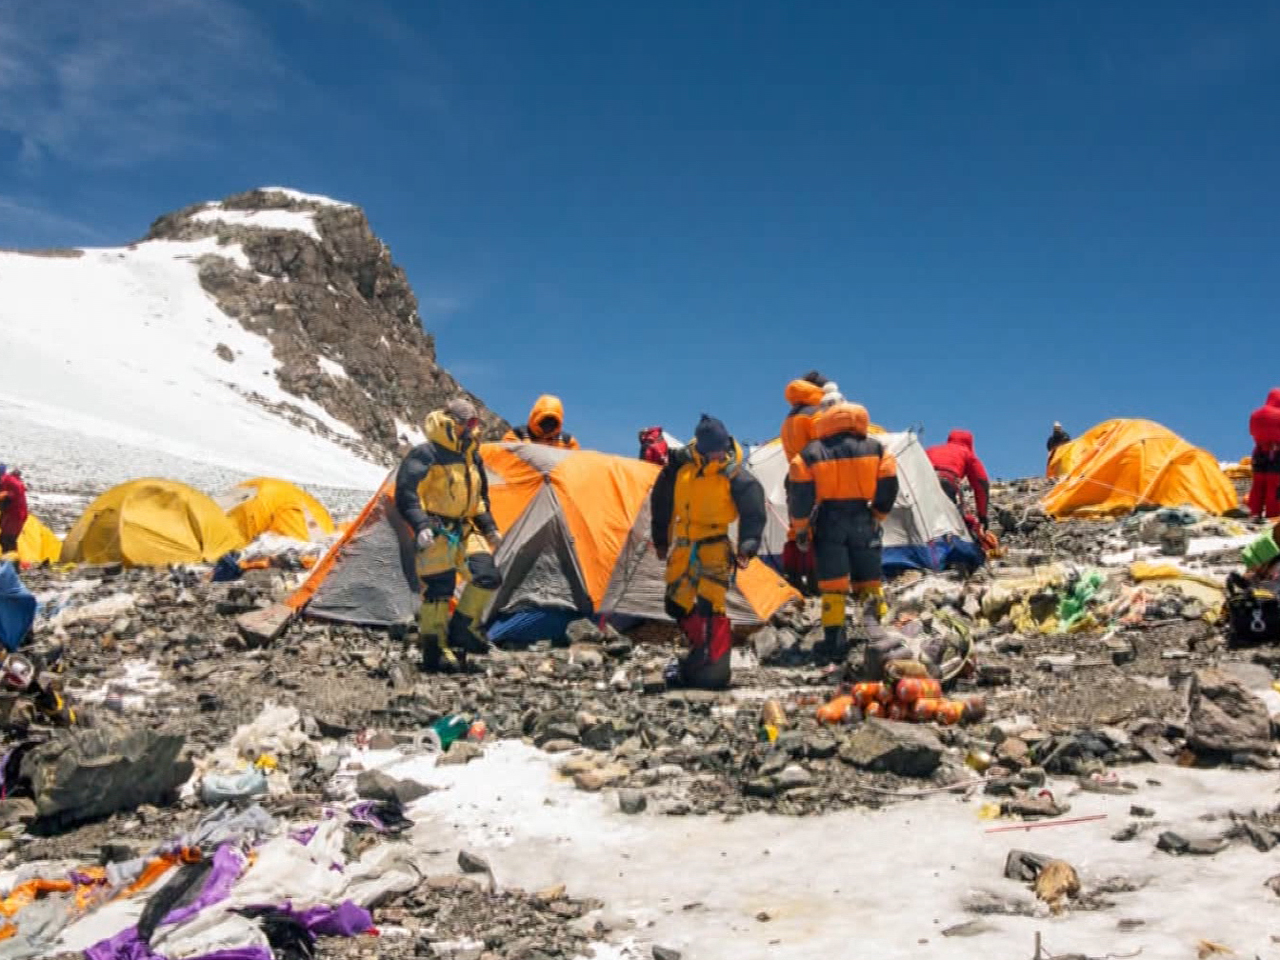 60 of climbing leaves Everest polluted, crowded